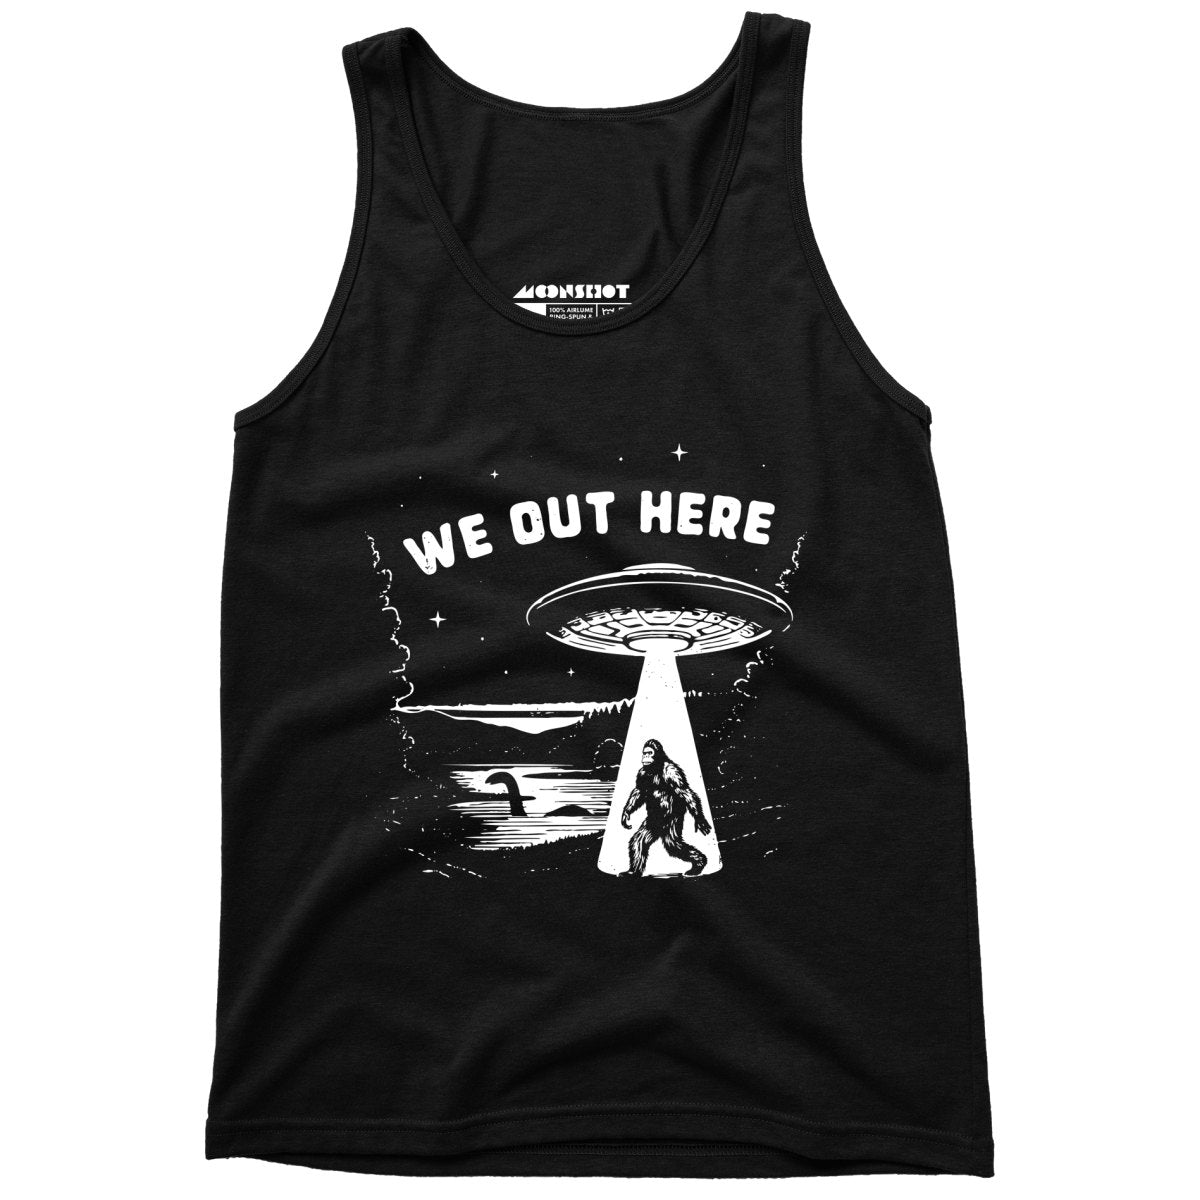 We Out Here - Unisex Tank Top